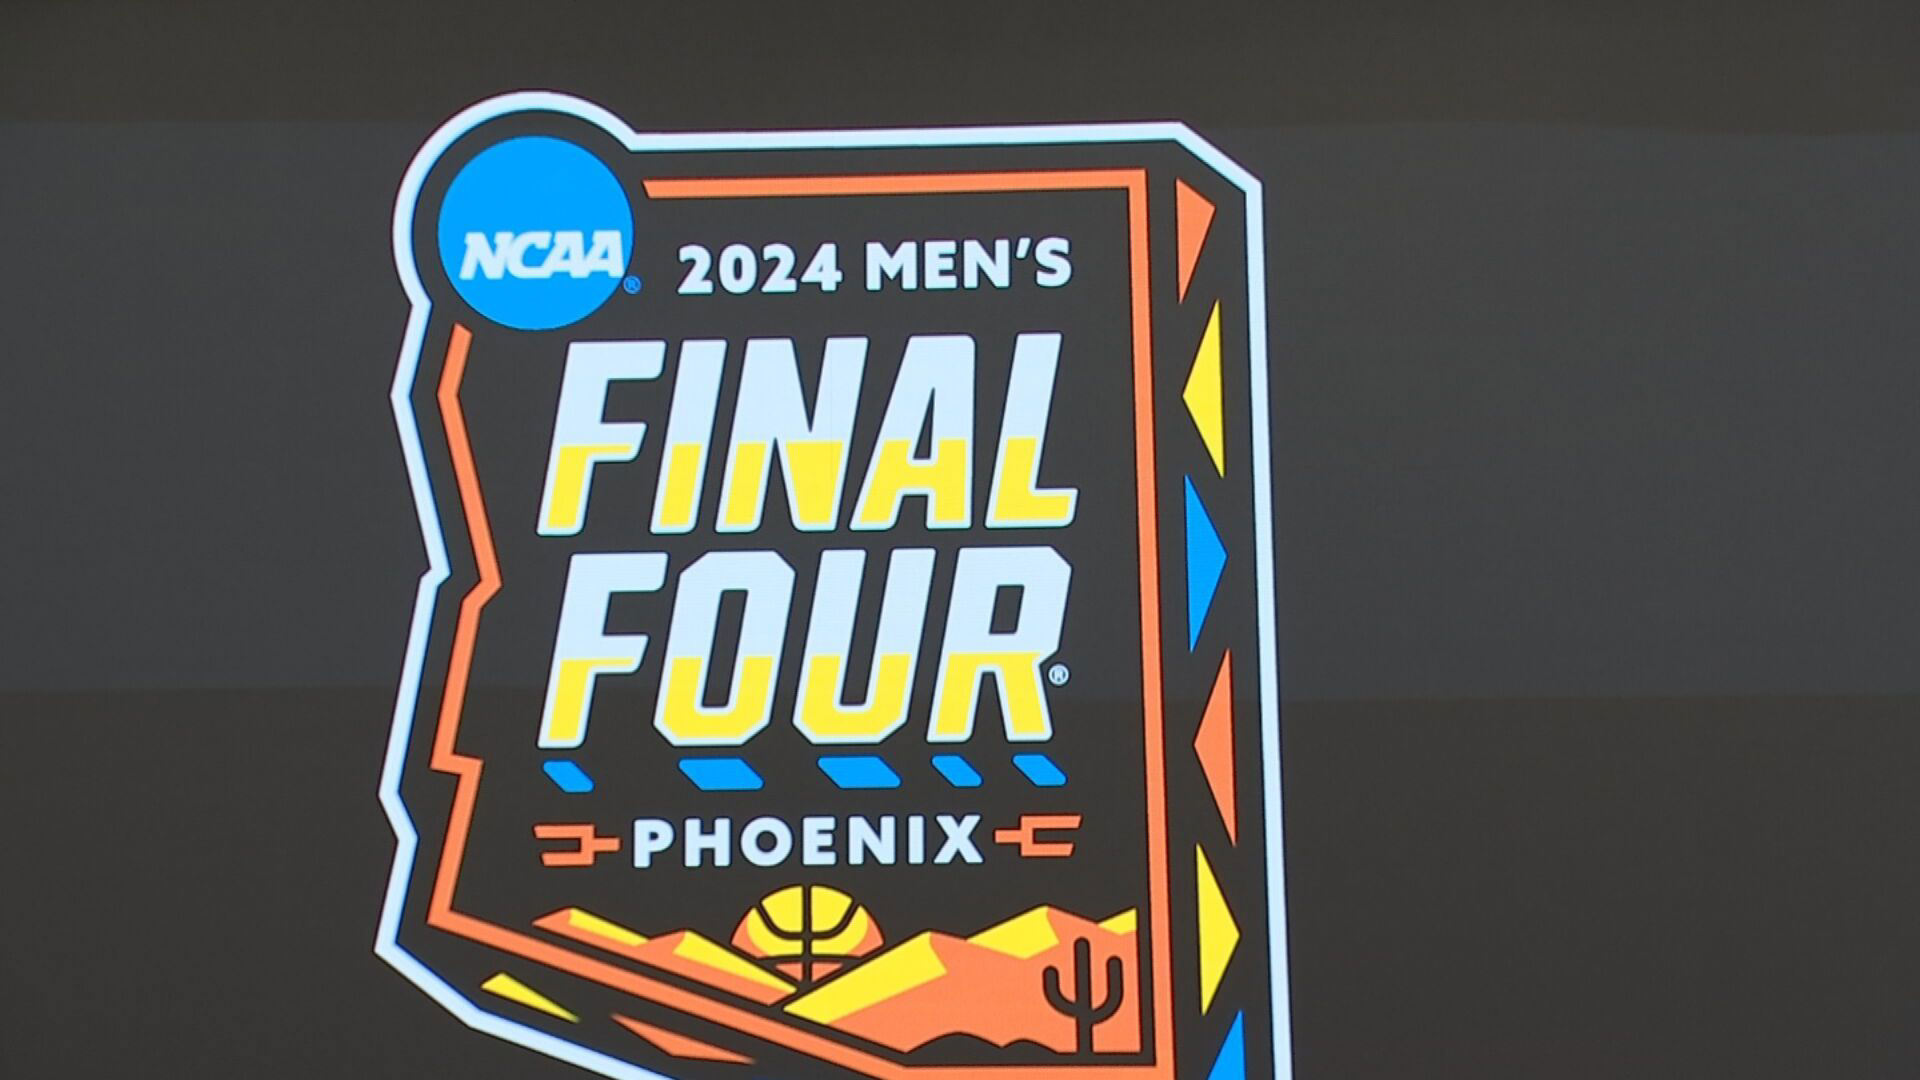 It’s your last chance to score tickets for the NCAA Final Four 2024 in